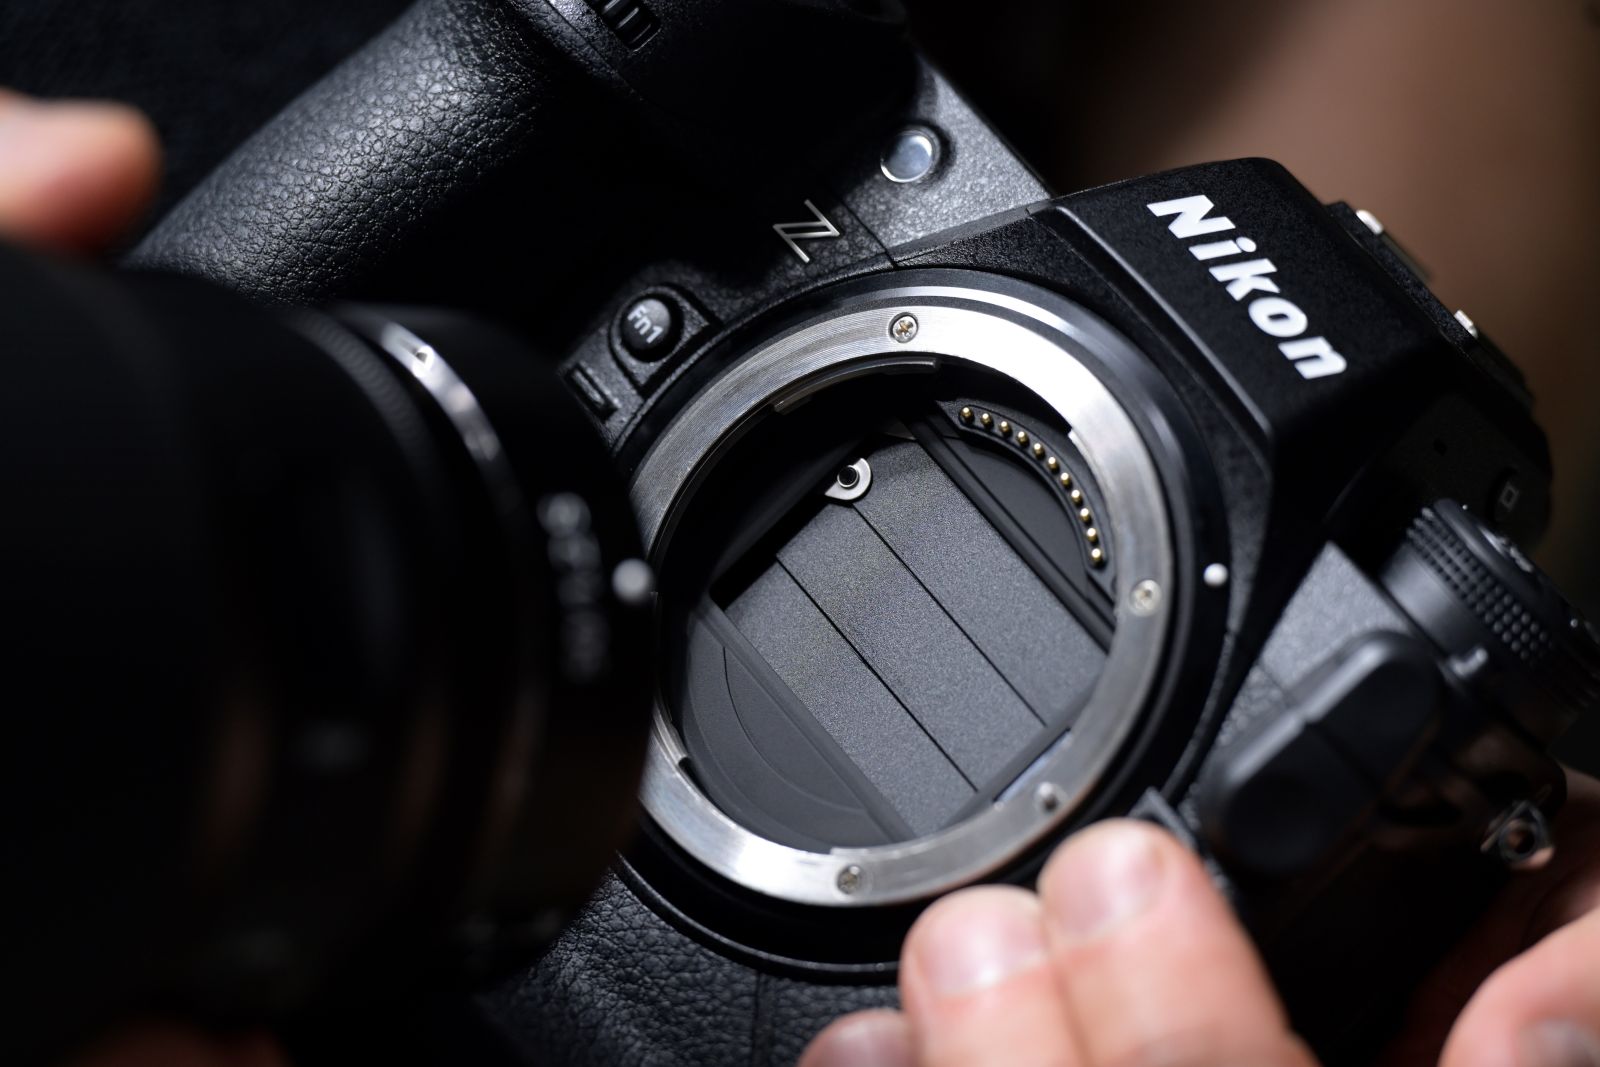 Nikon Z9 Hands-on Review: Is this Nikon's most impressive camera ever?